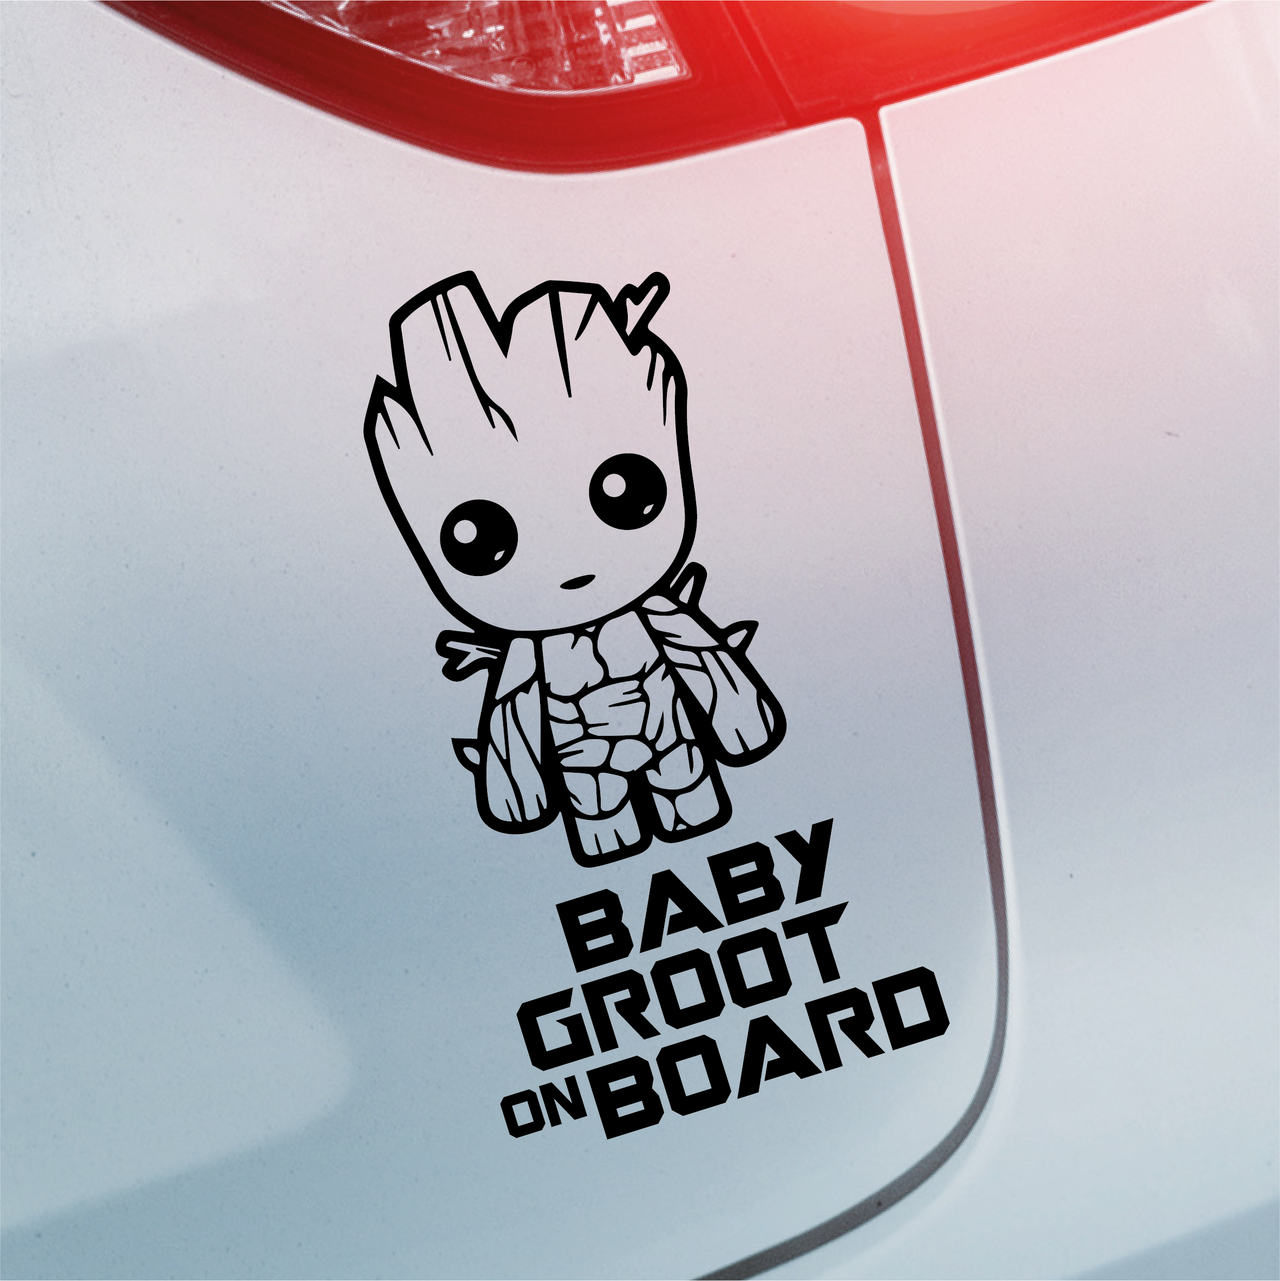 Baby Groot On Board Car Decal - Type 1